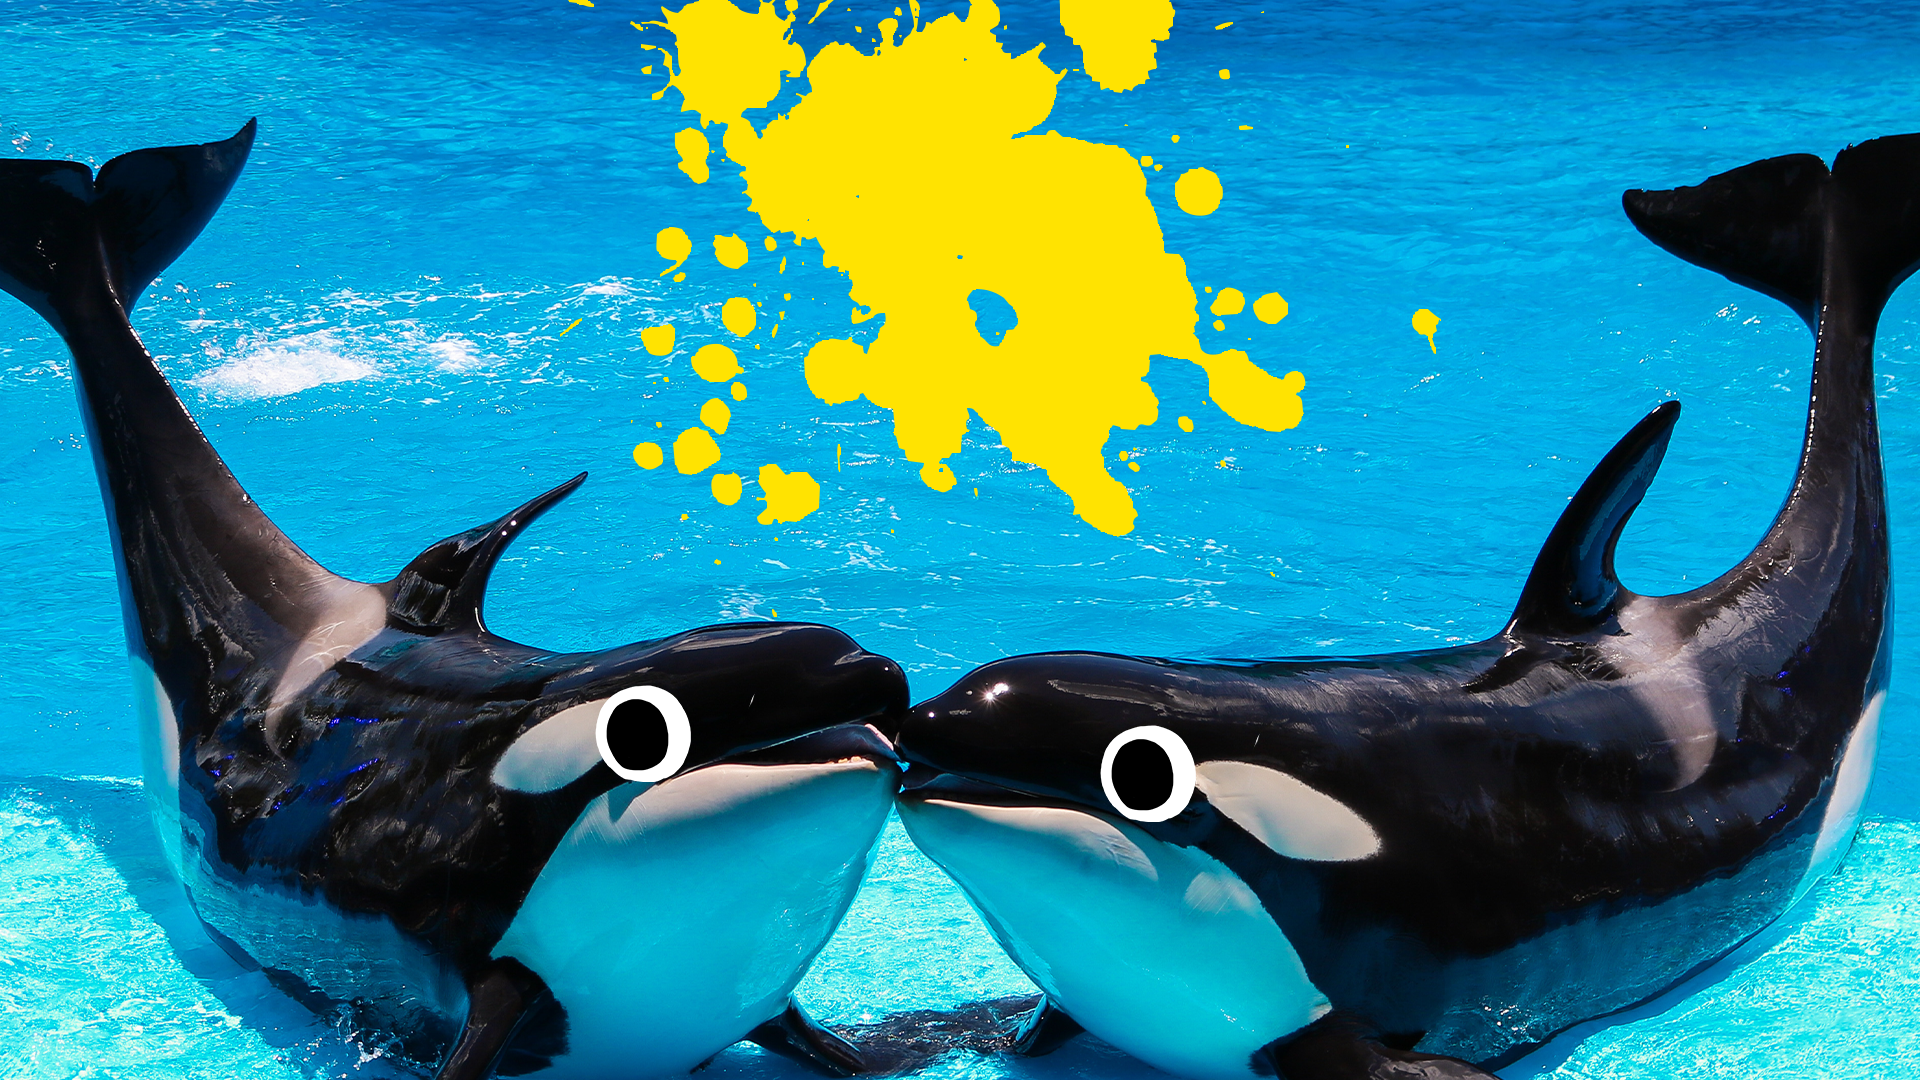 Two killer whales with splat